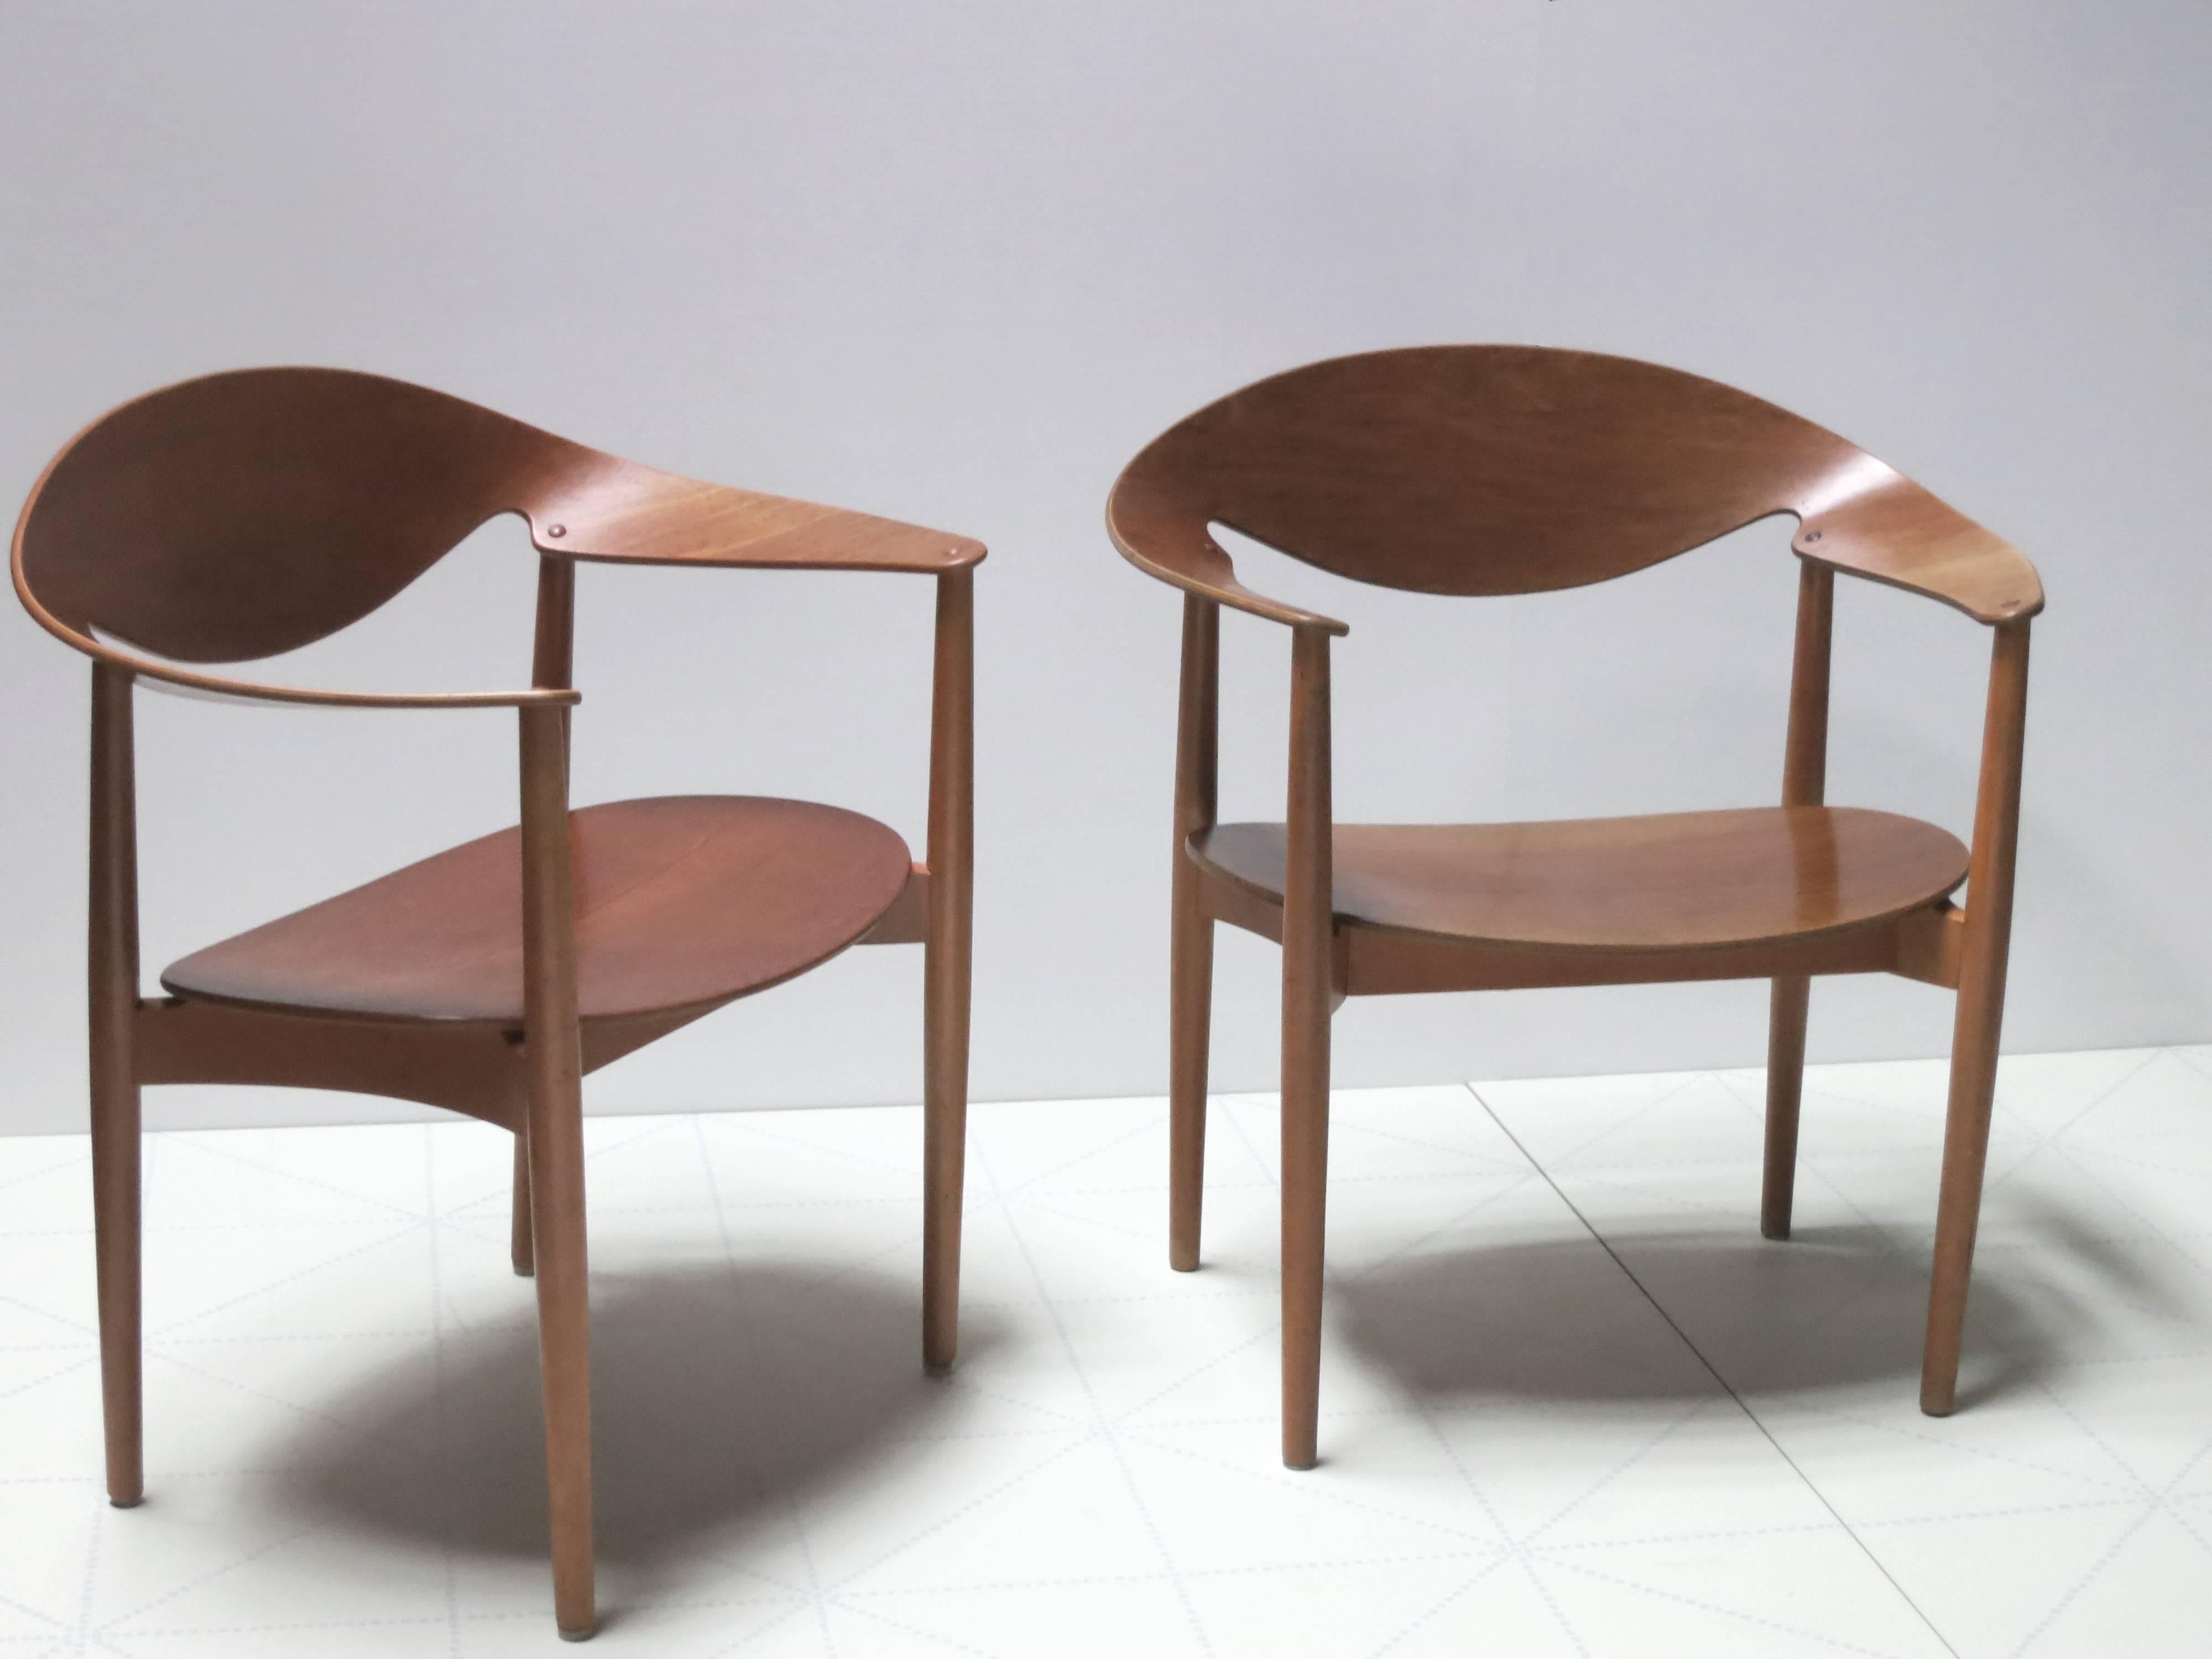 Pair of Metropolitan Chairs by Ejner Larsen and Axel Bender Madsen. These chairs take their name from the Metropolitan Museum of Art, NY, where they were shown in 1960 at the breakthrough exhibition, 